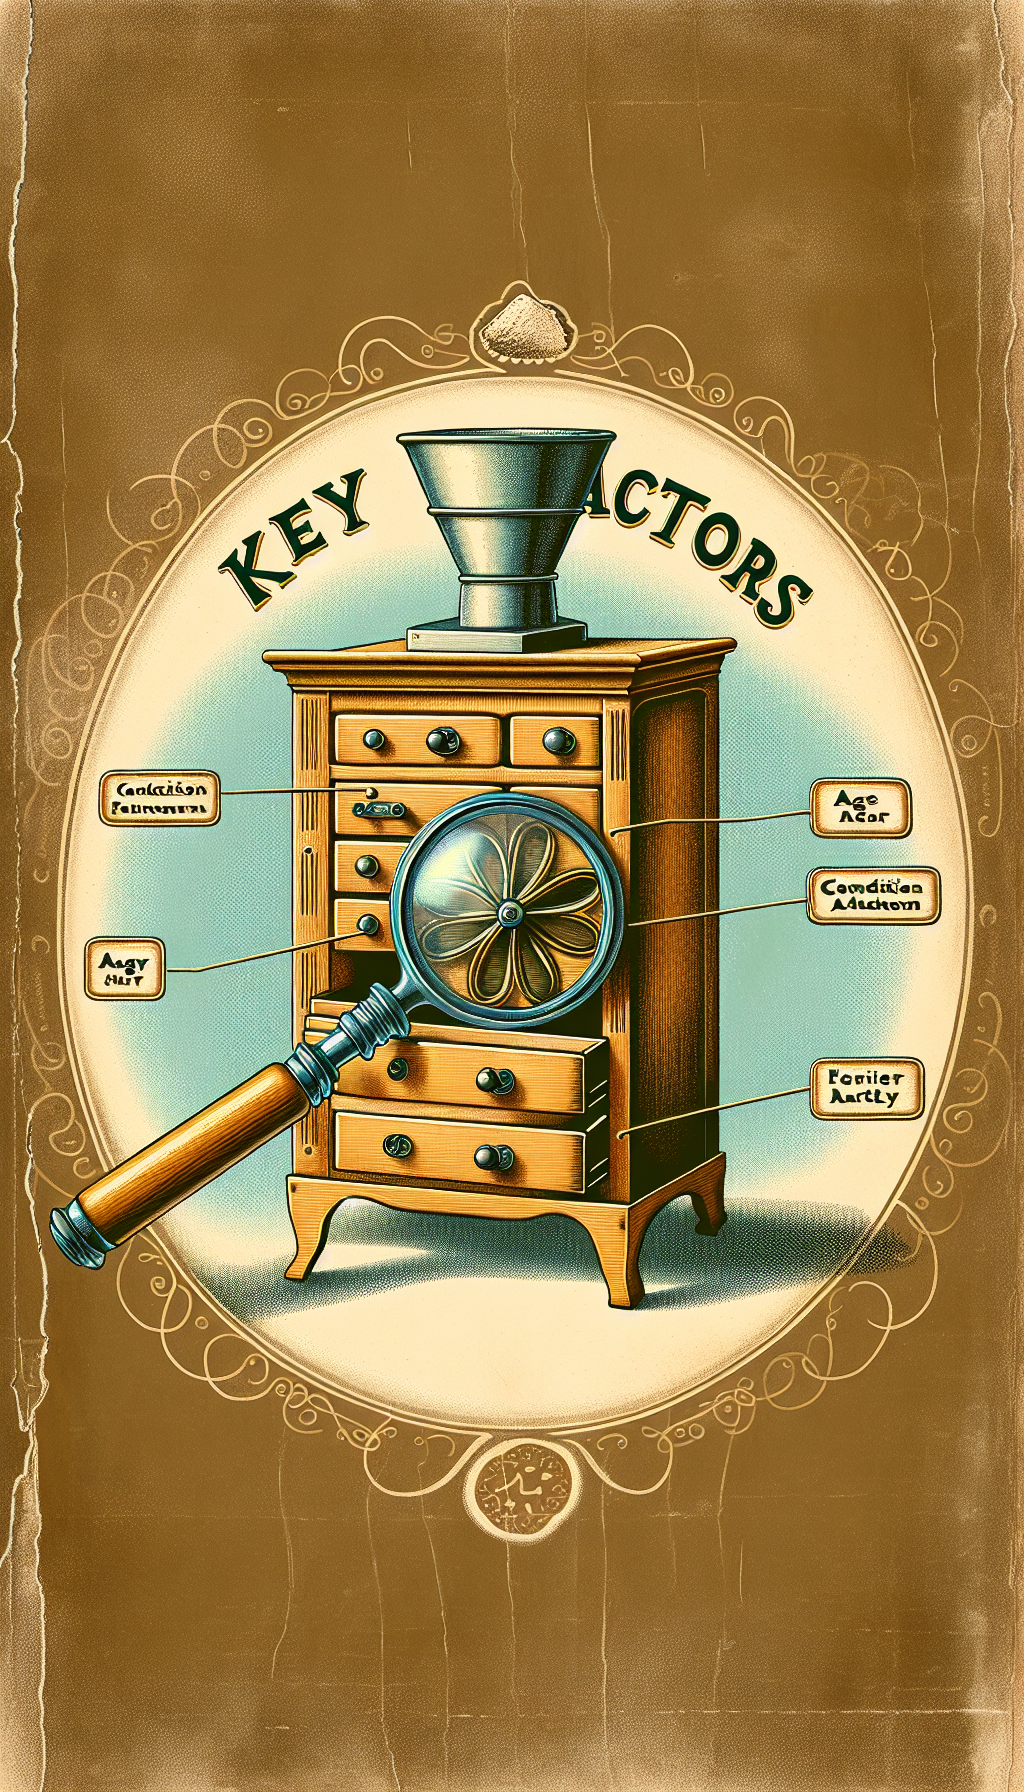 An illustration styled as a whimsical vintage advertisement features a classic Hoosier cabinet with a prominent flour sifter attachment. A magnifying glass hovers over, highlighting its patina and ornate hardware, turning them into shimmering gold accents to symbolize appraisal. The words "Key Factors" are etched on cabinet drawers, introducing elements such as age, condition, and rarity.